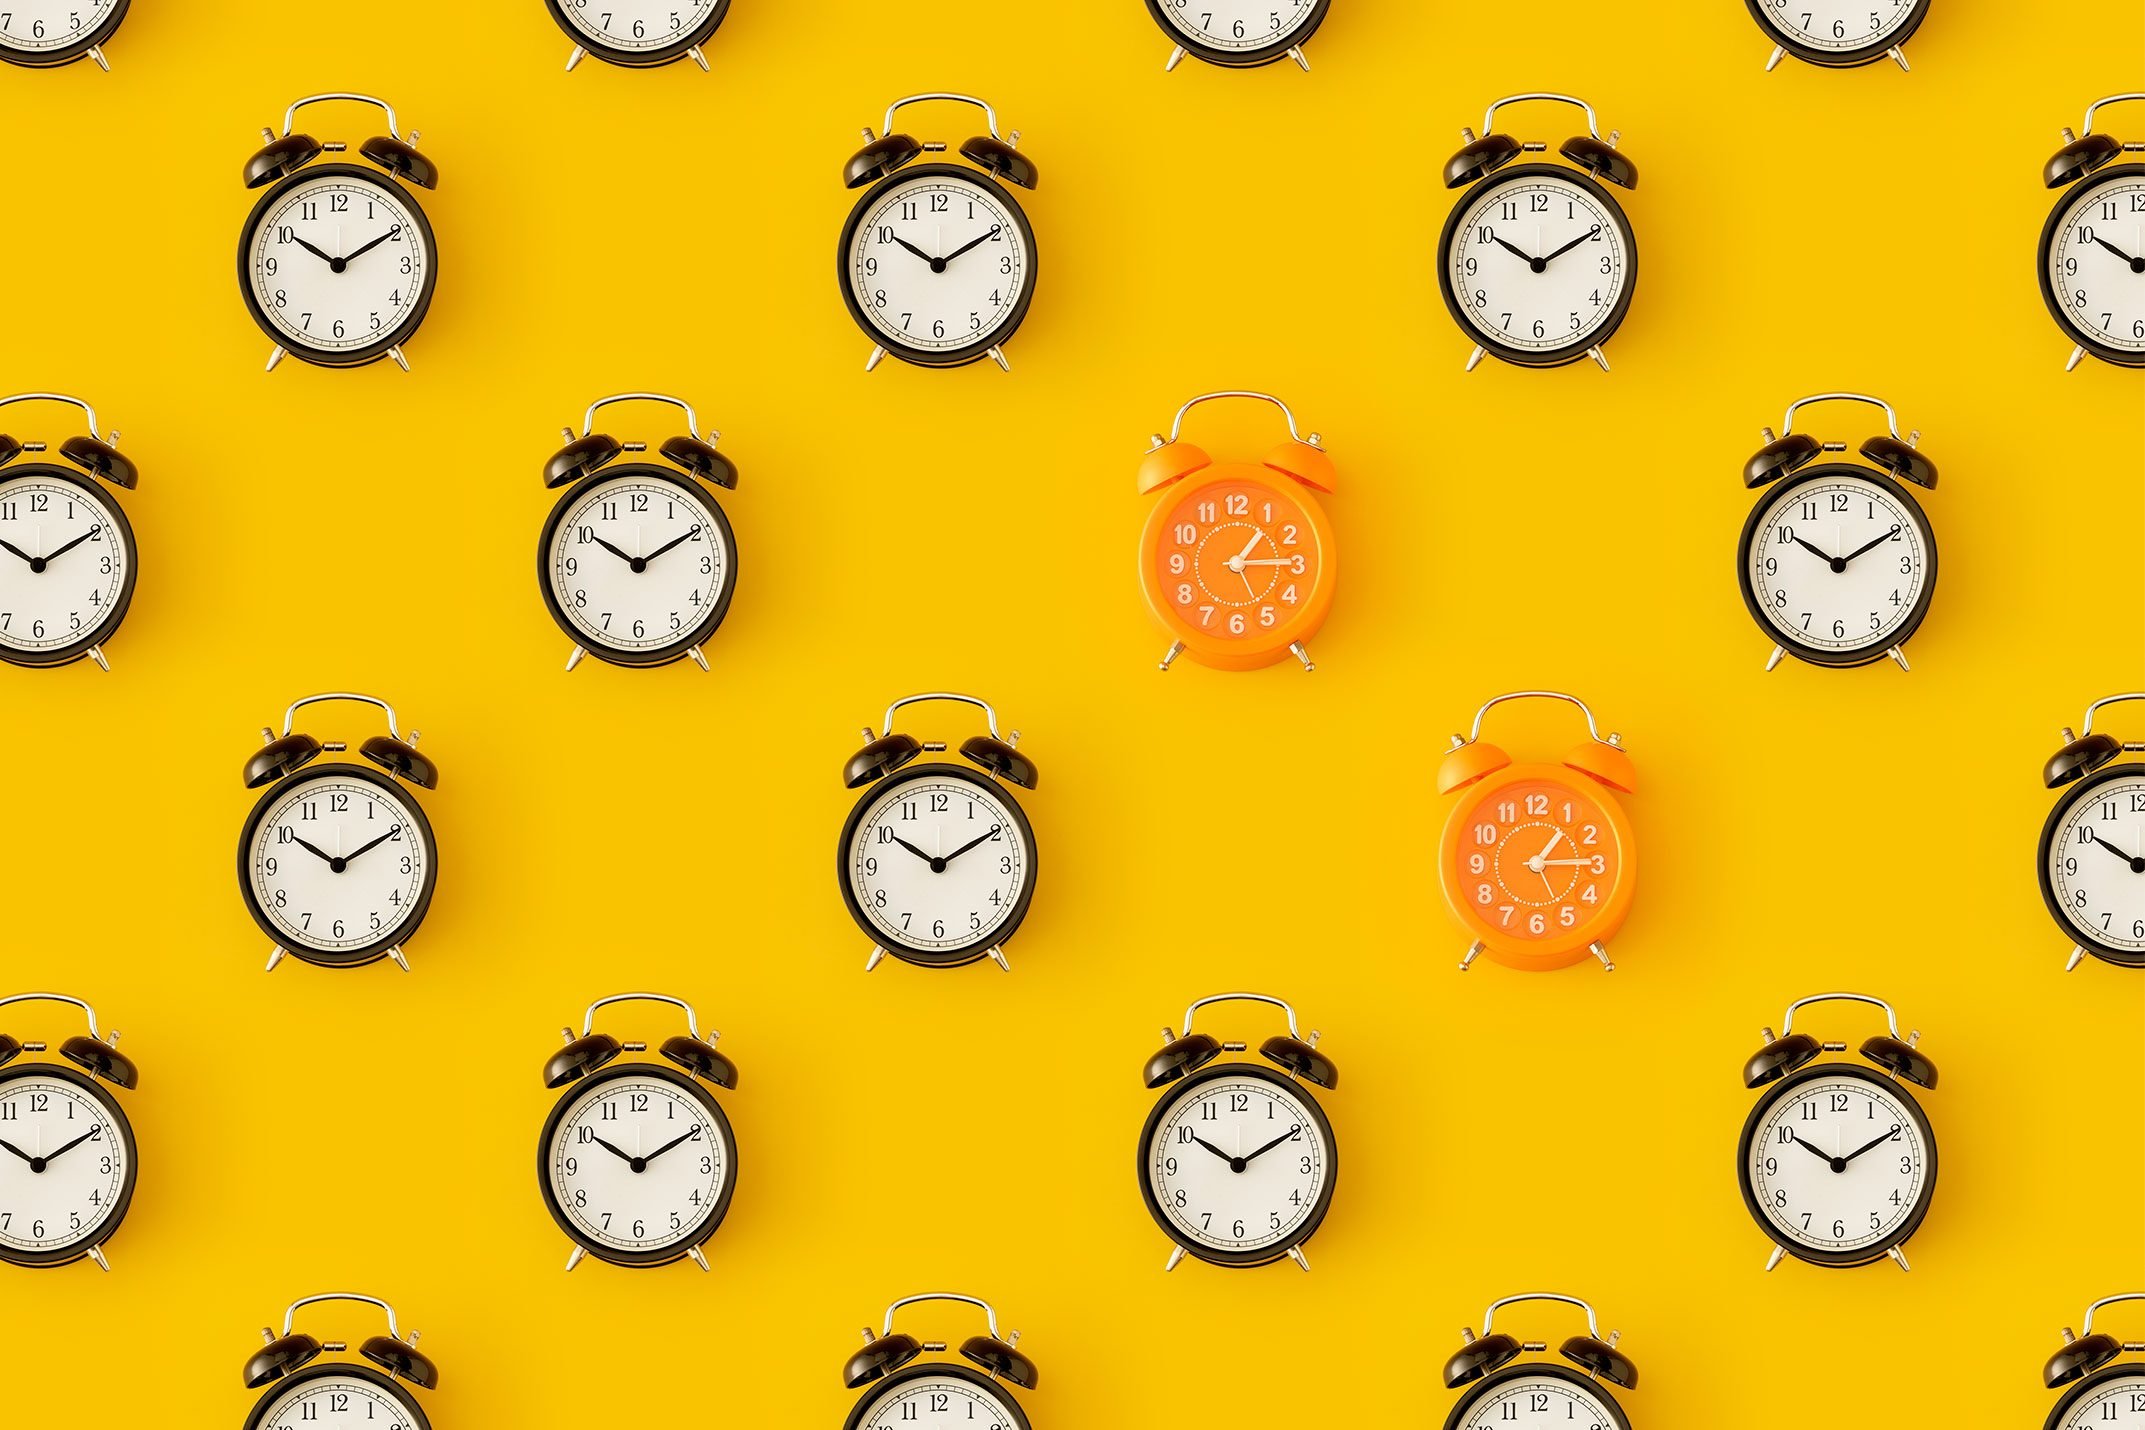 pattern of clocks on a yellow background; all clocks are black alarm clock except two that are orange